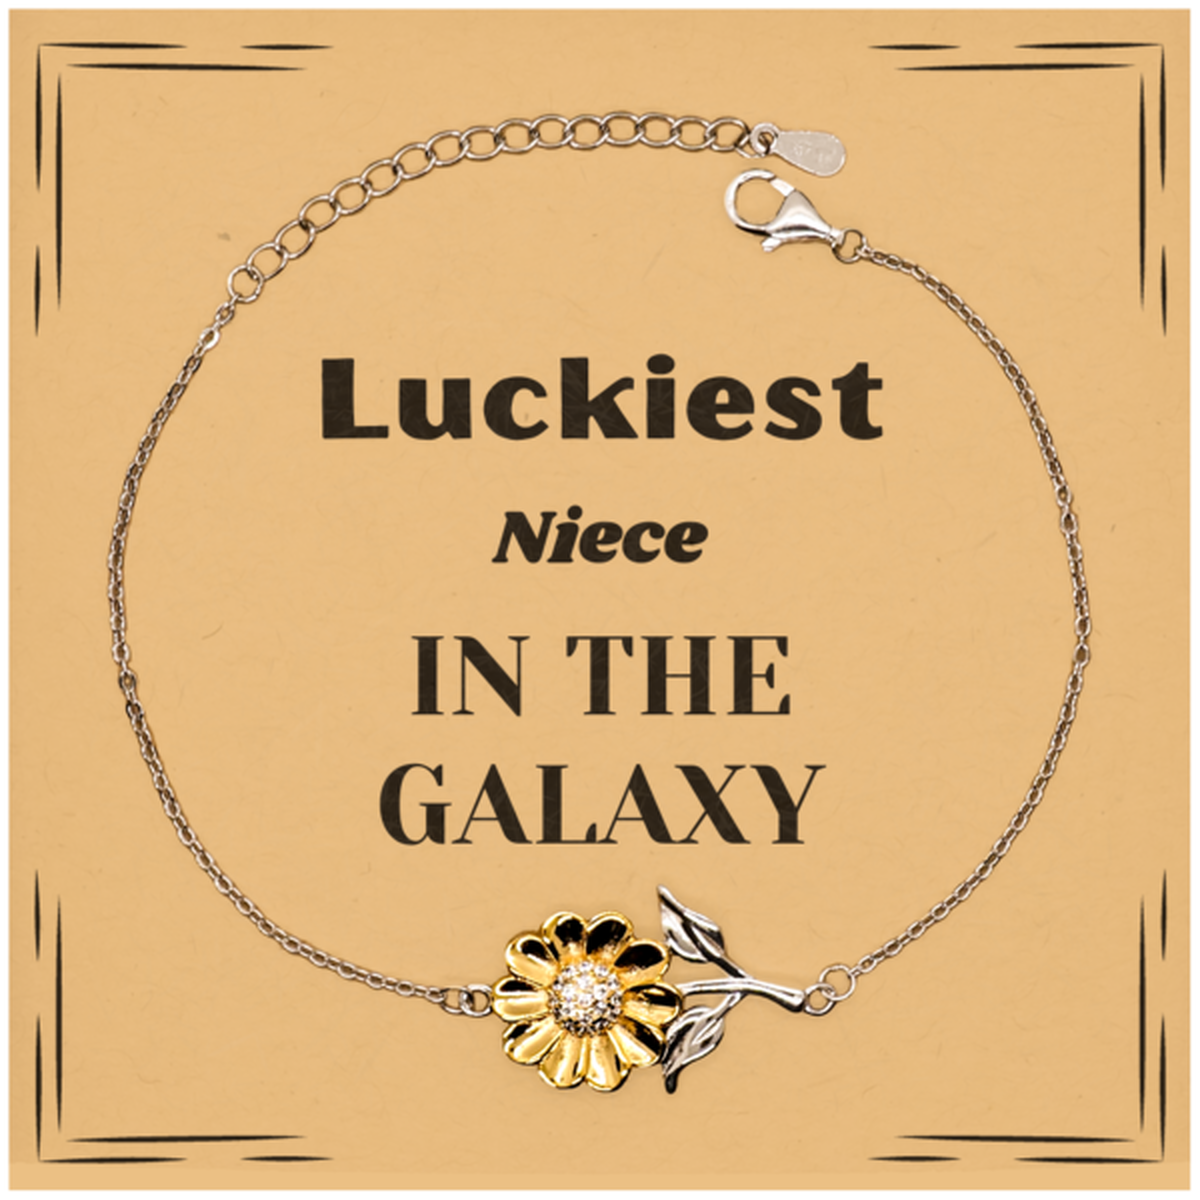 Luckiest Niece in the Galaxy, To My Niece Message Card Gifts, Christmas Niece Sunflower Bracelet Gifts, X-mas Birthday Unique Gifts For Niece Men Women